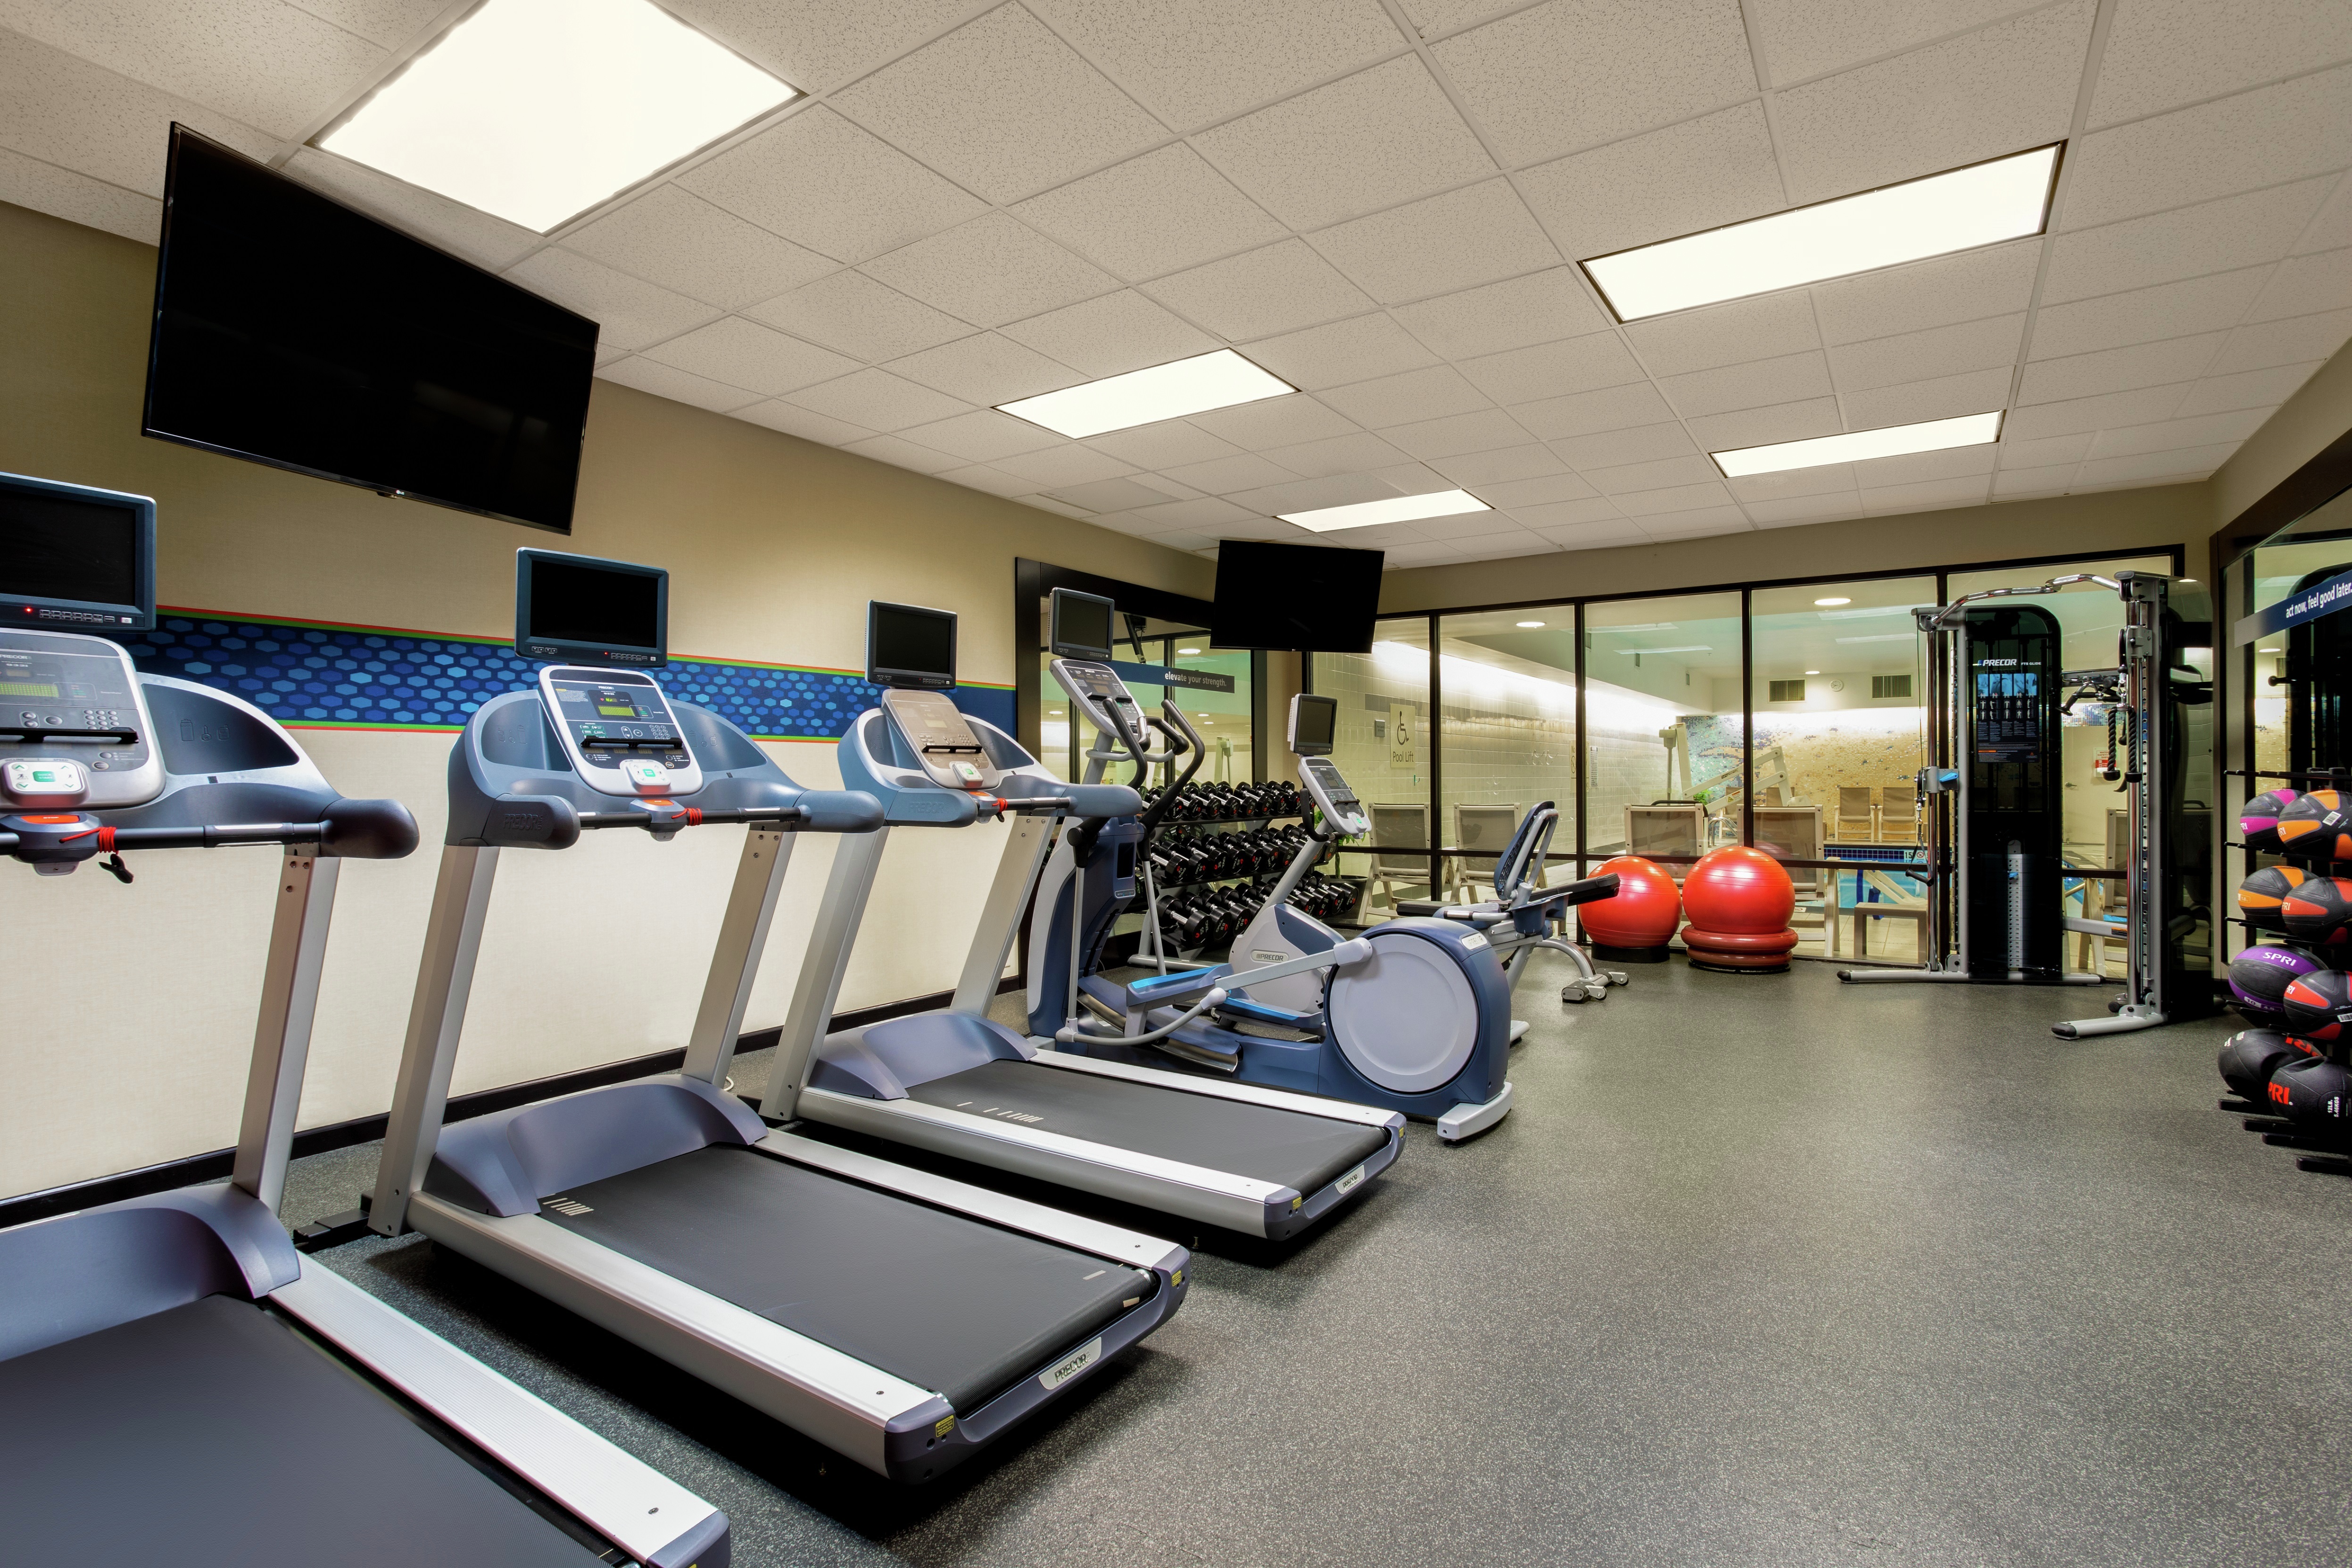 Fitness Center with Treadmills, Cross-Trainer and Wall Mounted HDTV